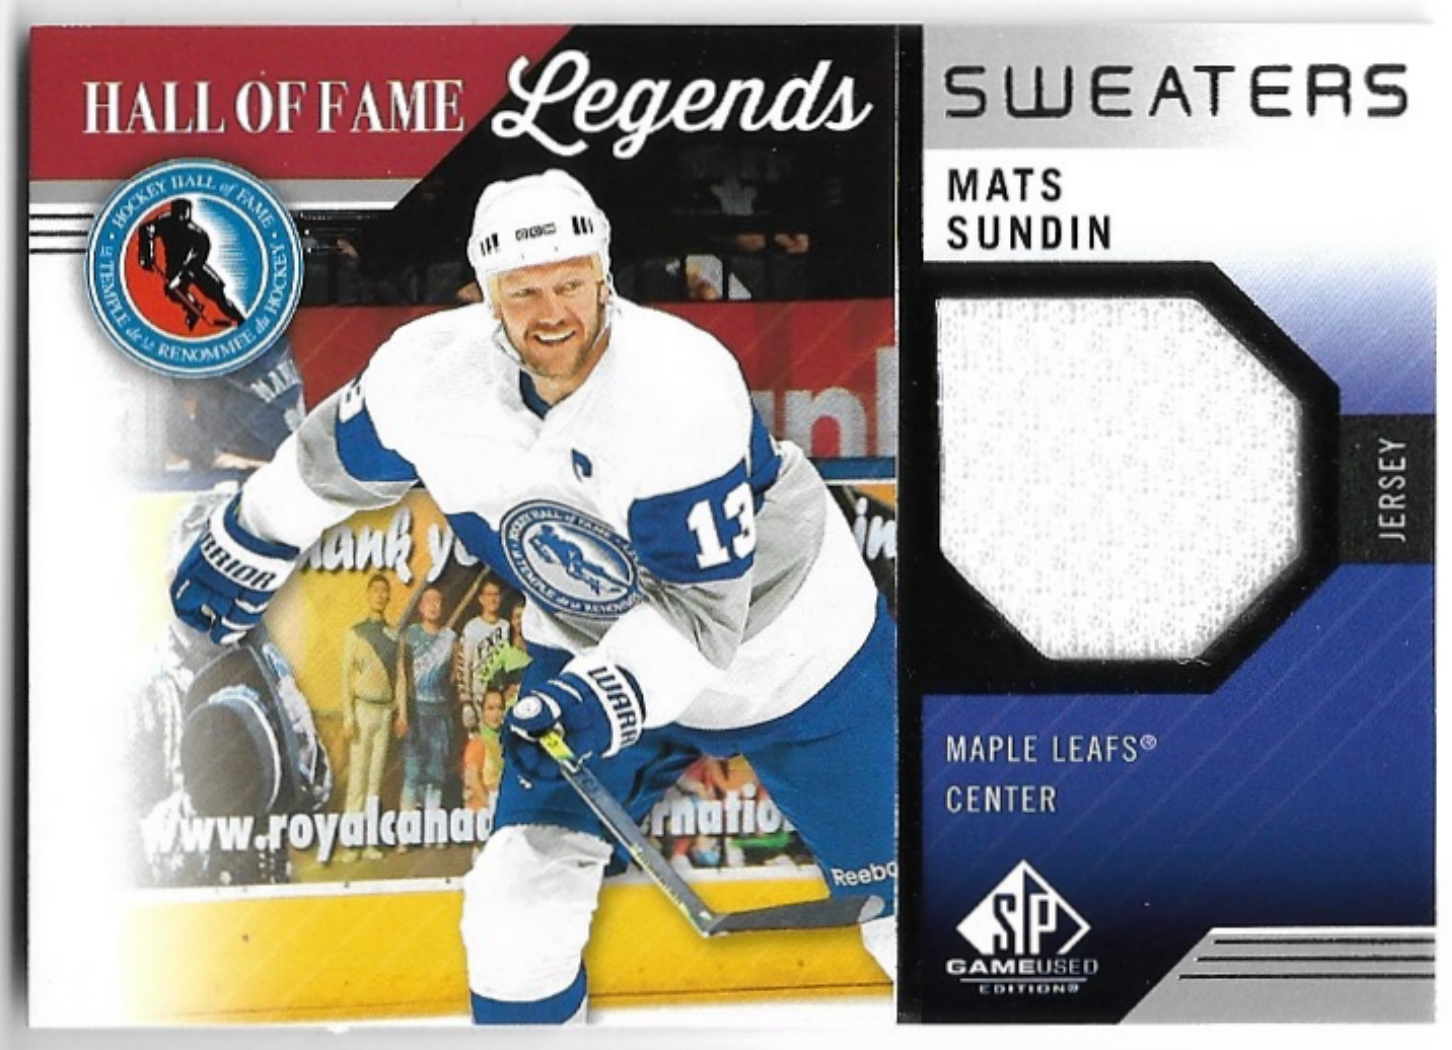 Jersey Hall of Fame Legends Sweaters MATS SUNDIN 21-22 UD SP Game Used